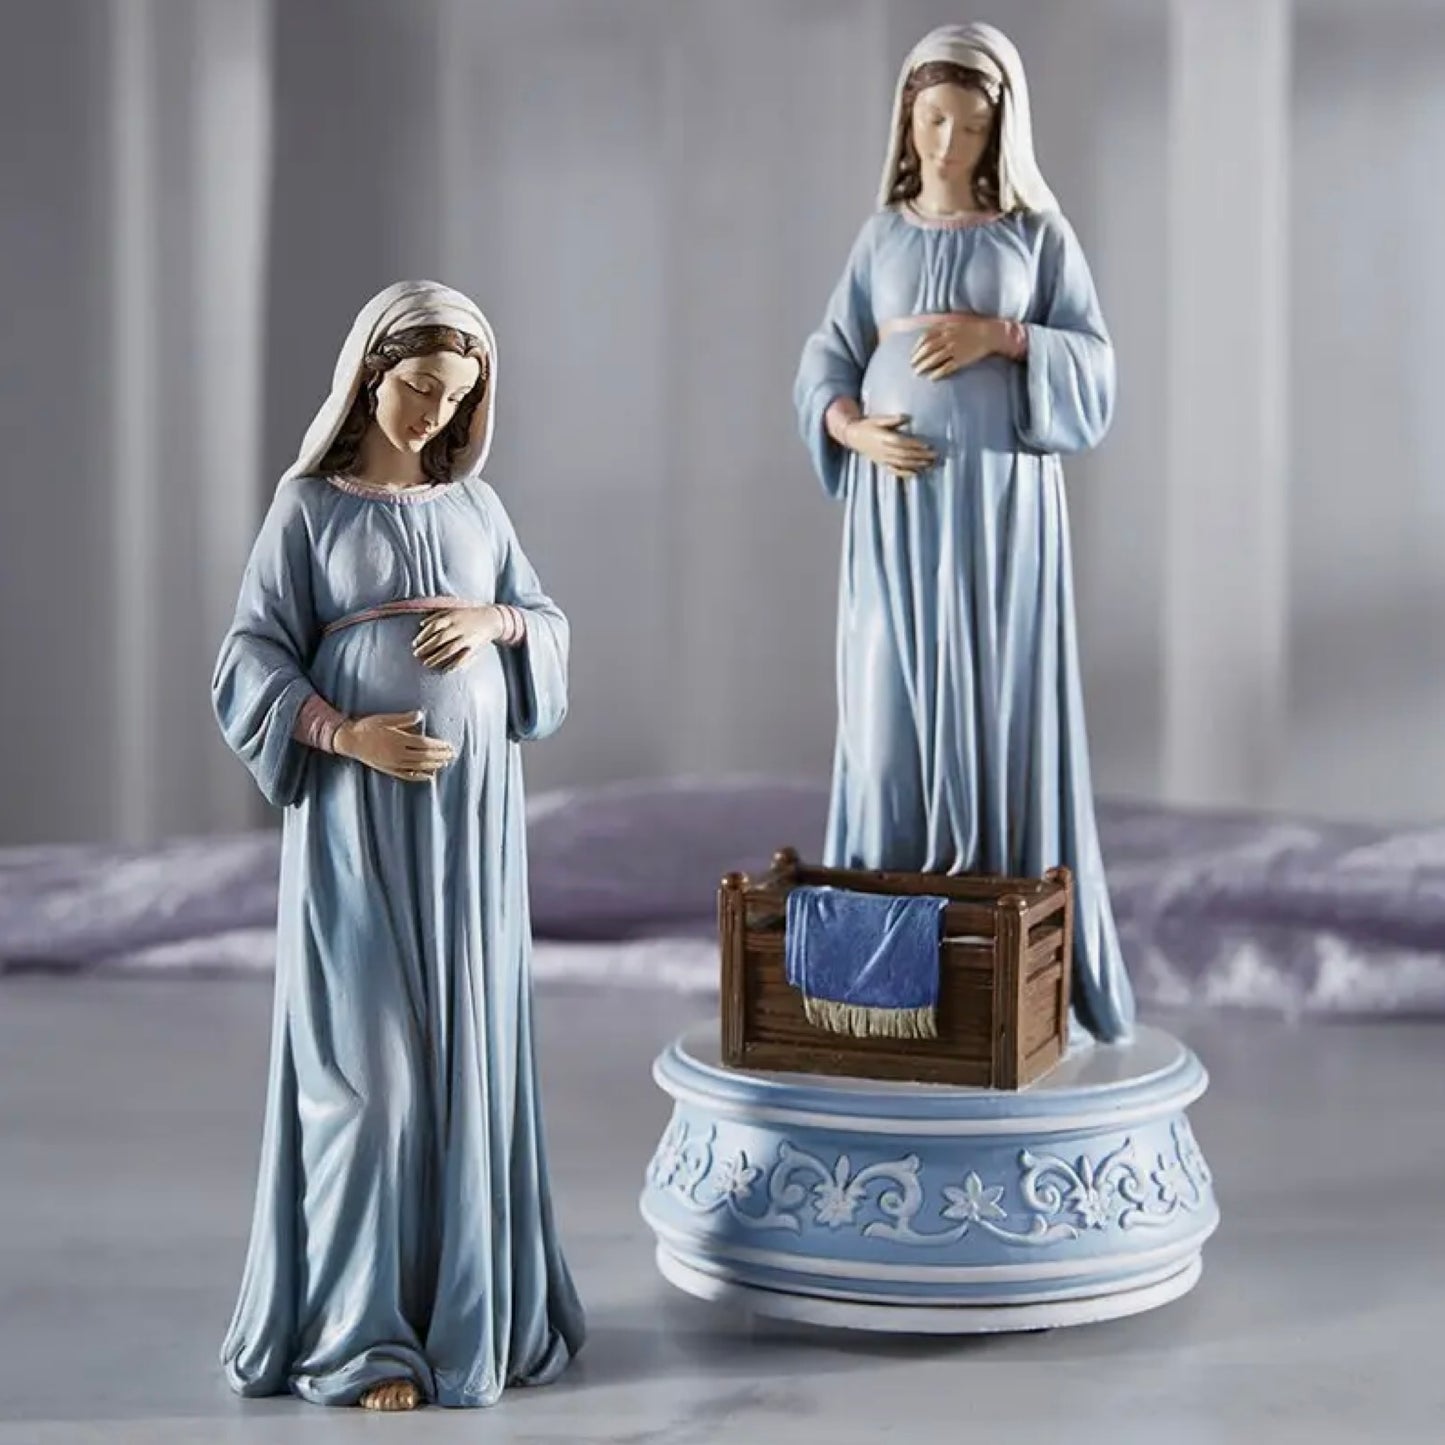 Our-Mary-Mother-of-God-Pregnant-Catholic-Statue-Figurines-by-Toscana